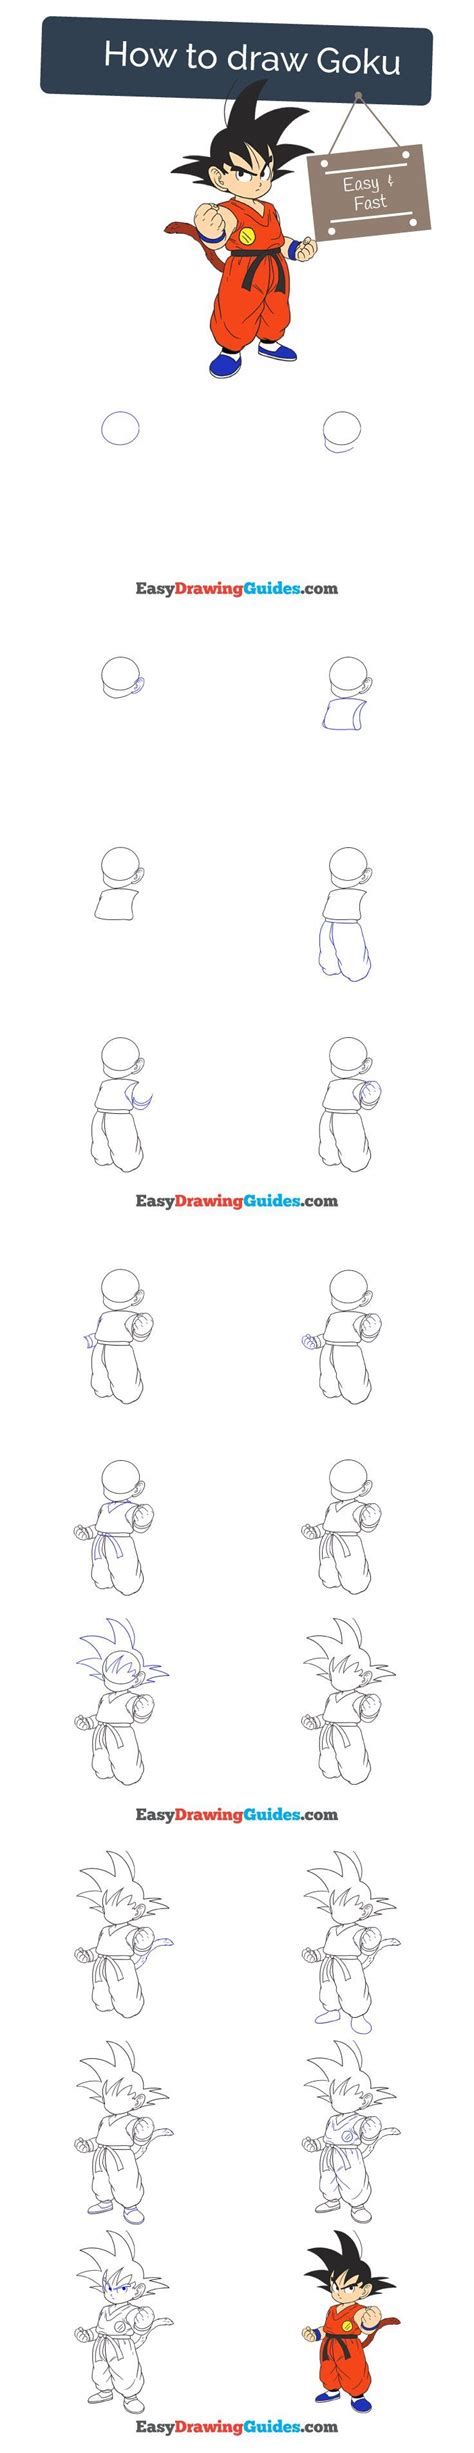 Wedraw is an app to learn how to draw step by step. How to Draw Goku in a Few Easy Steps | Easy Drawing Guides ...